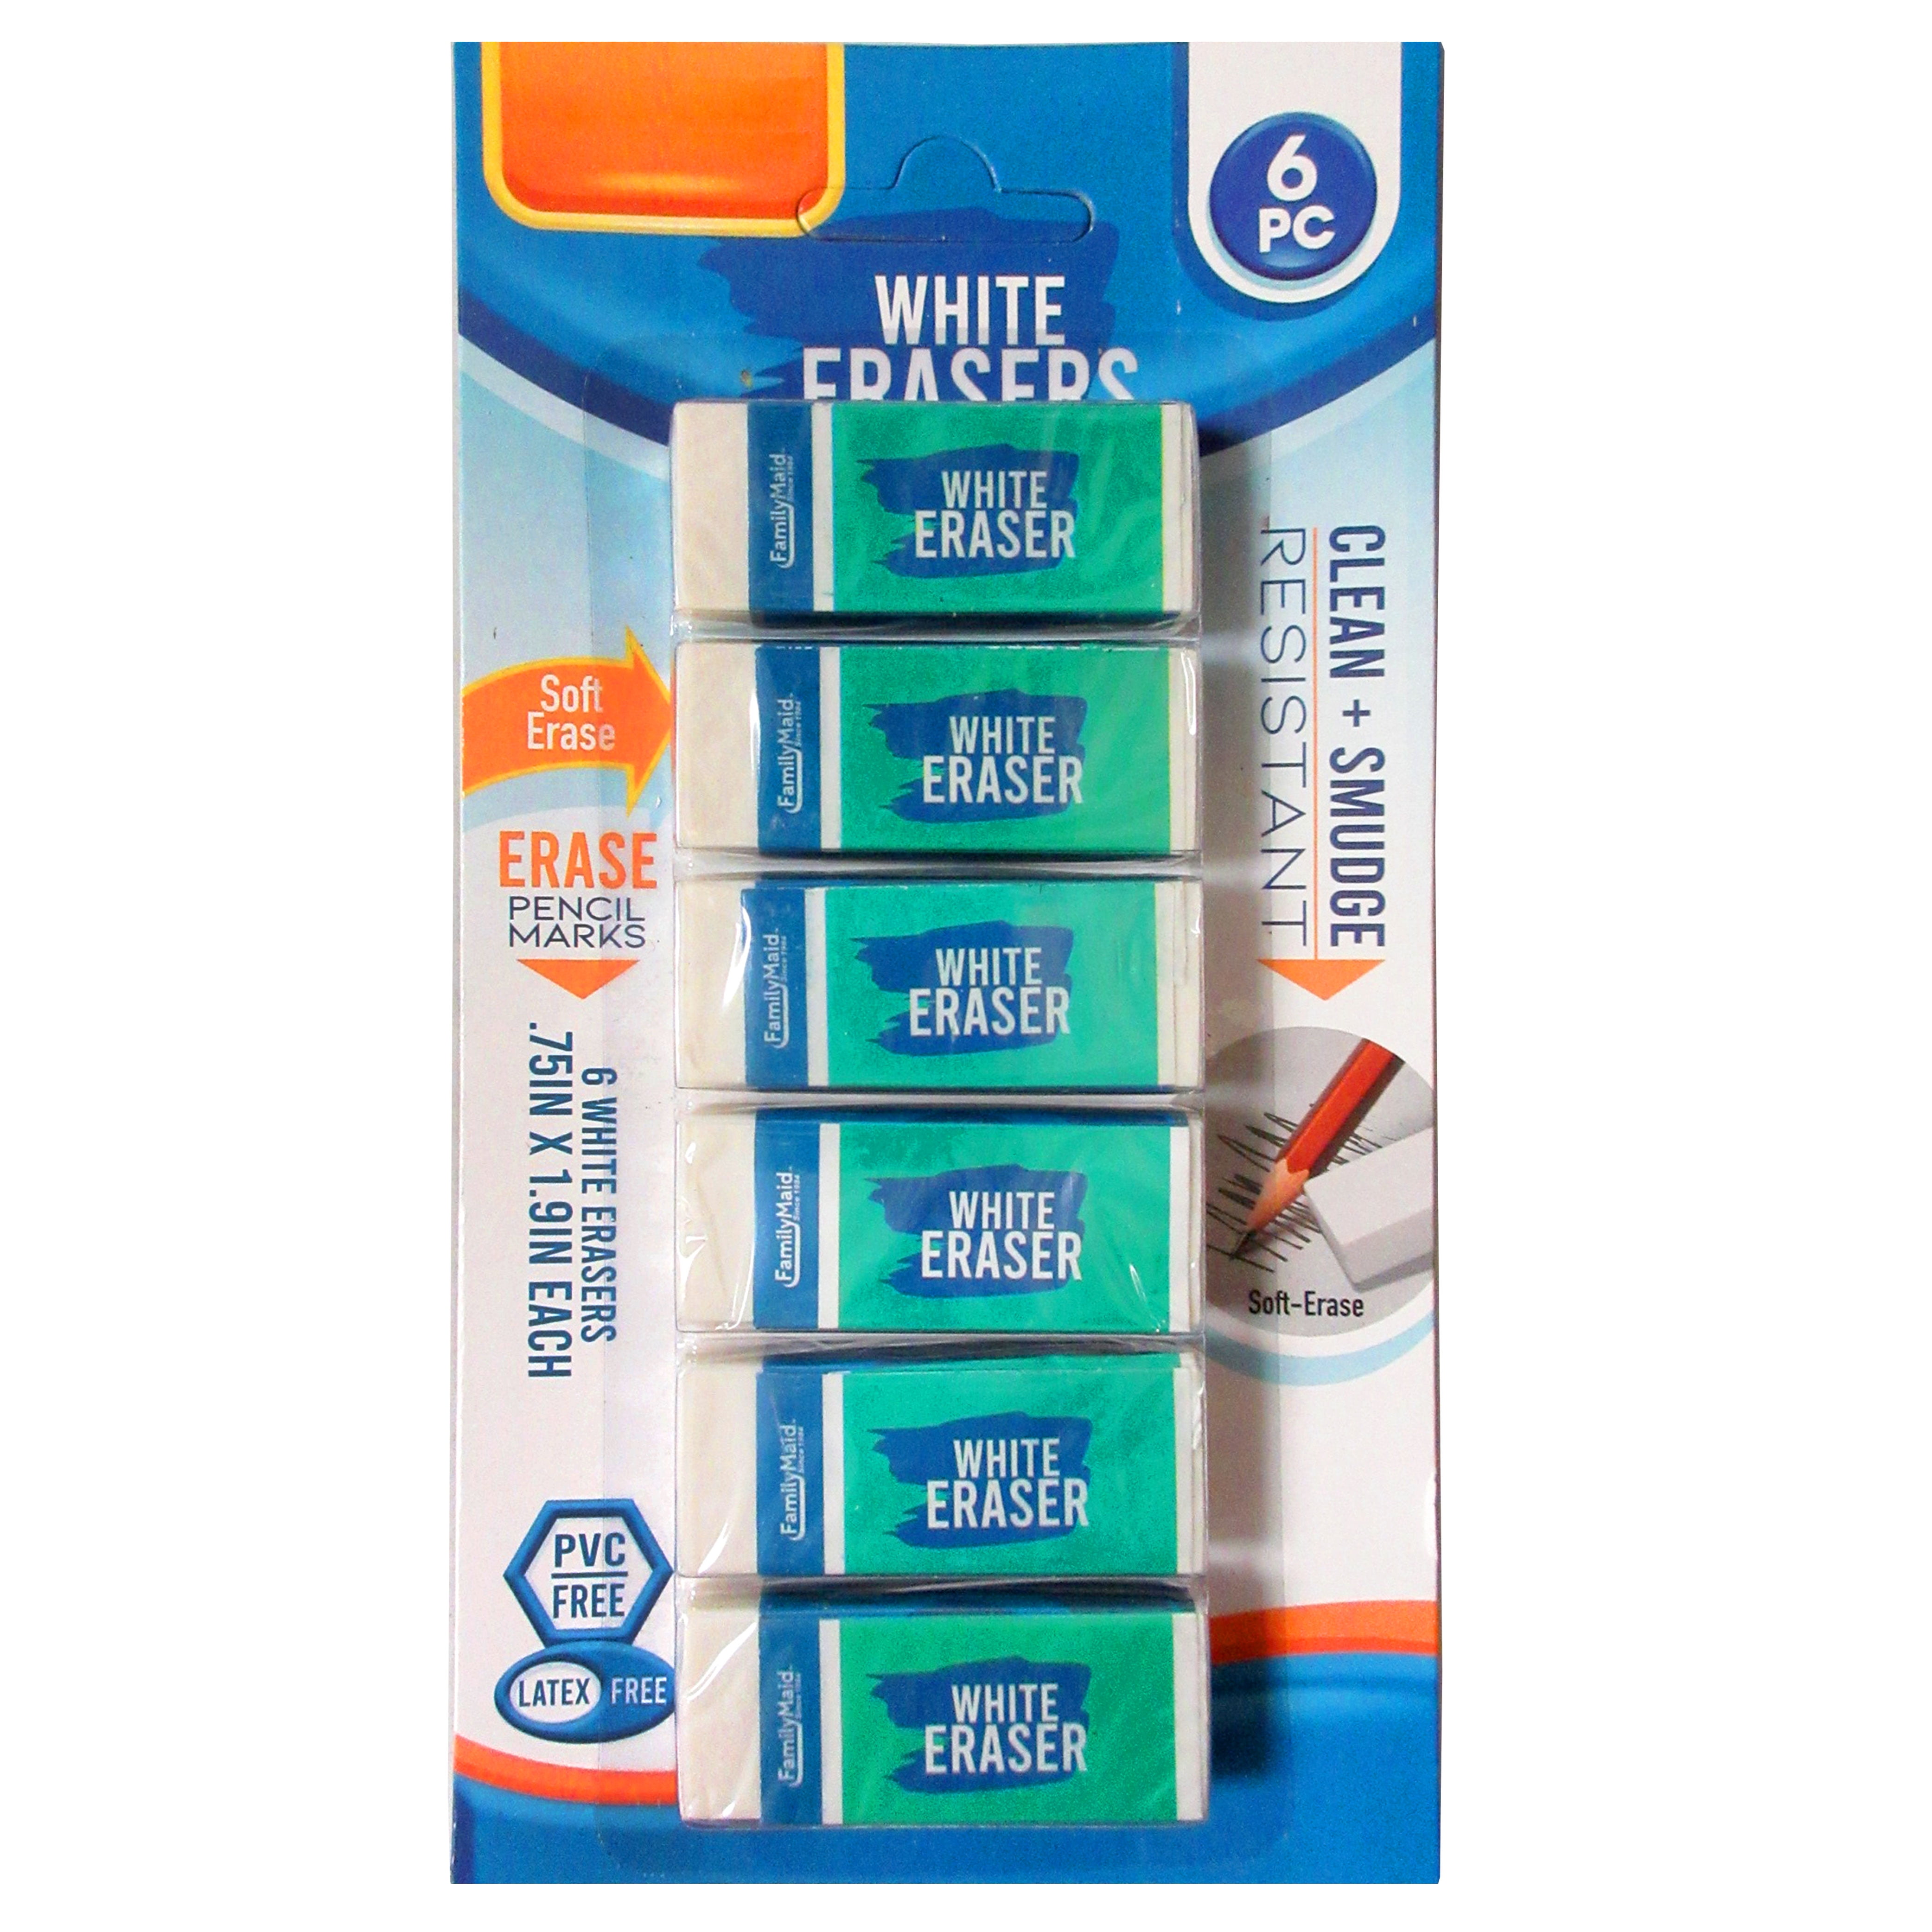 10 Best Pencil Erasers That Will Cleanly Remove Marks [2020]